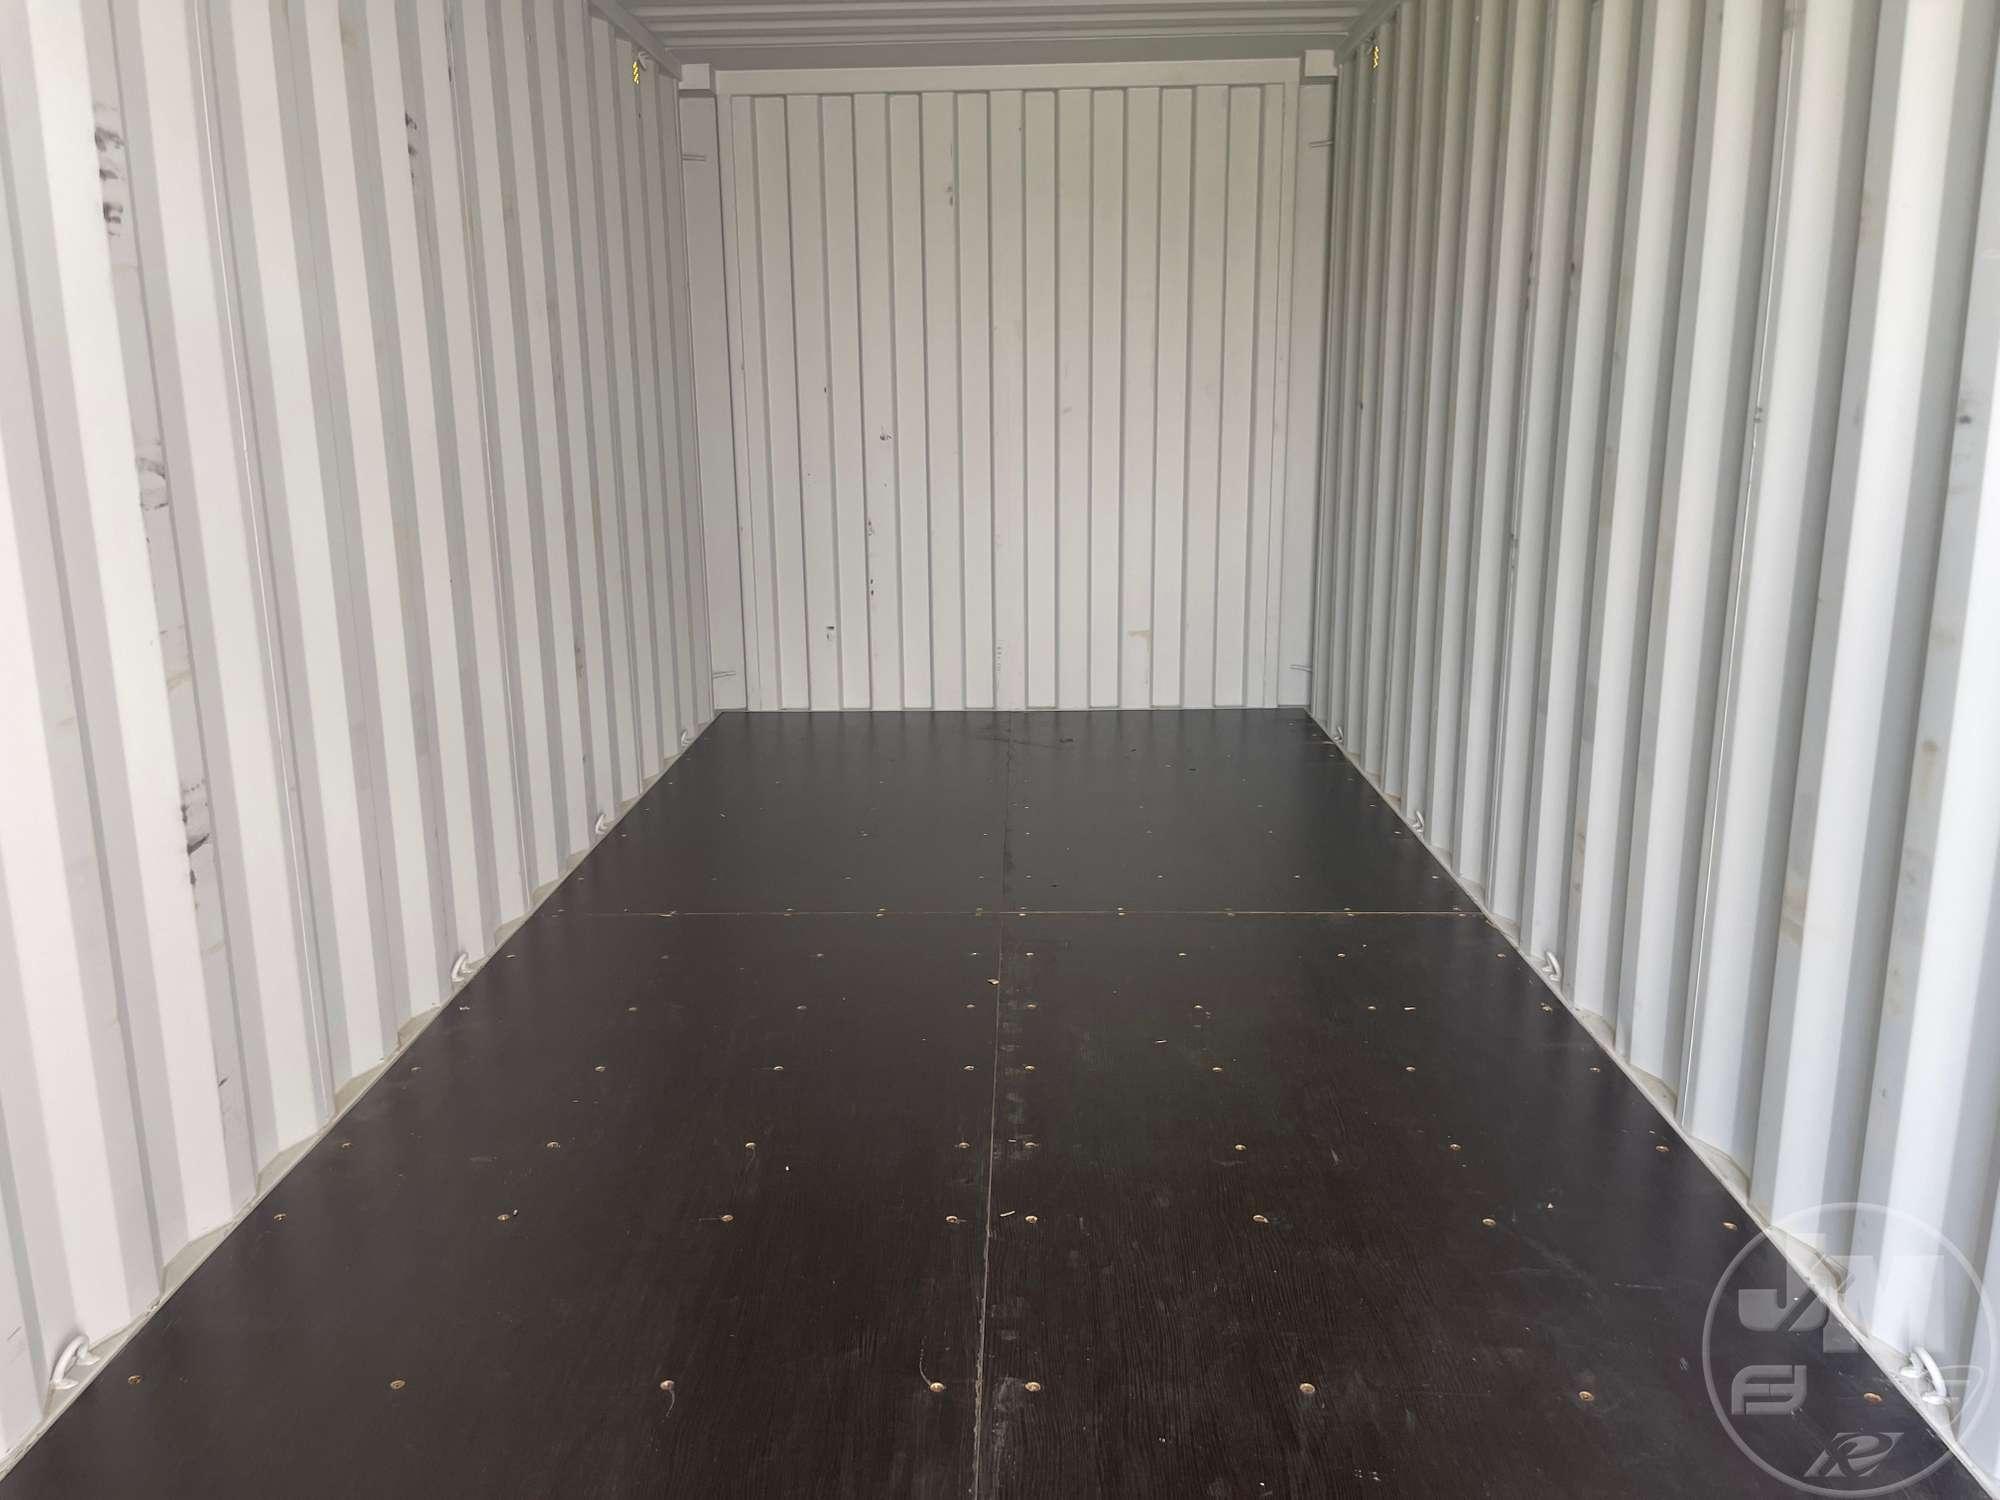 2023 WNG CONTAINER 20' CONTAINER SN: WNGU2311997